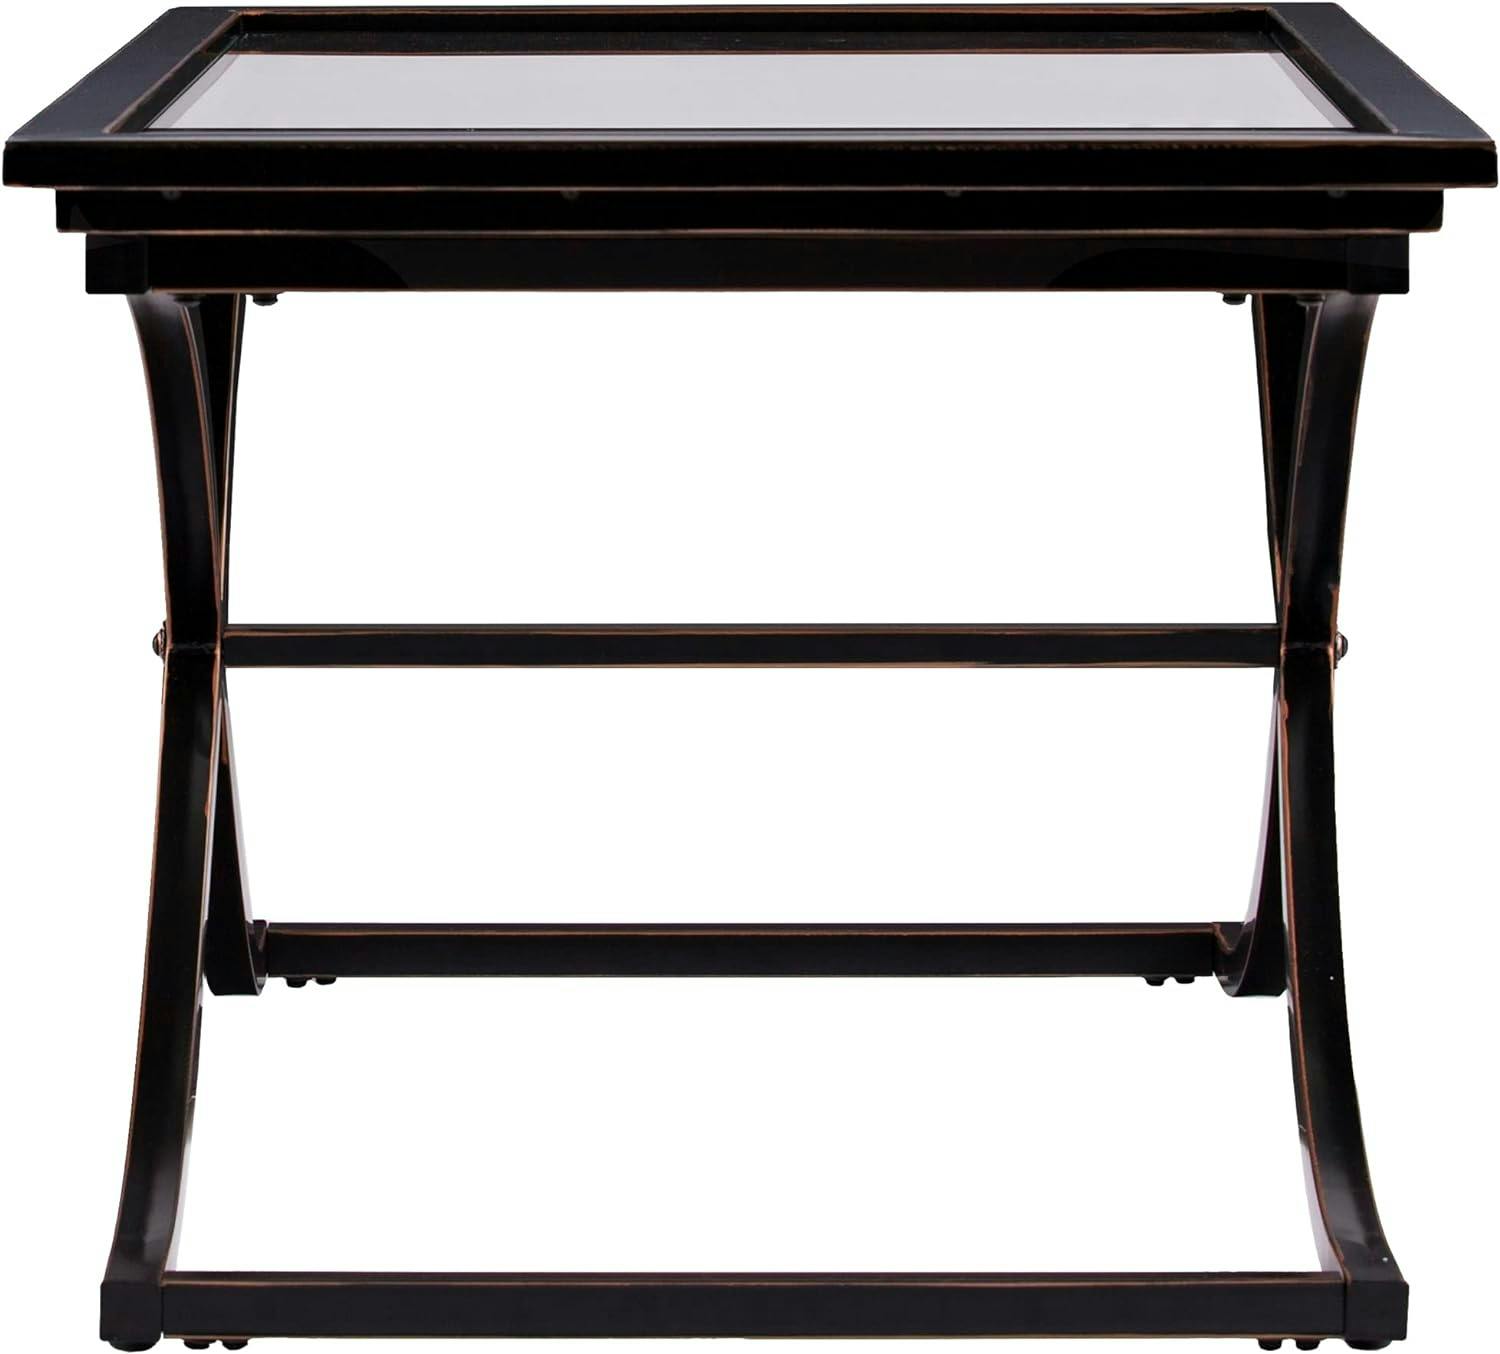 Vogue Black and Copper Distressed Tempered Glass Coffee Table